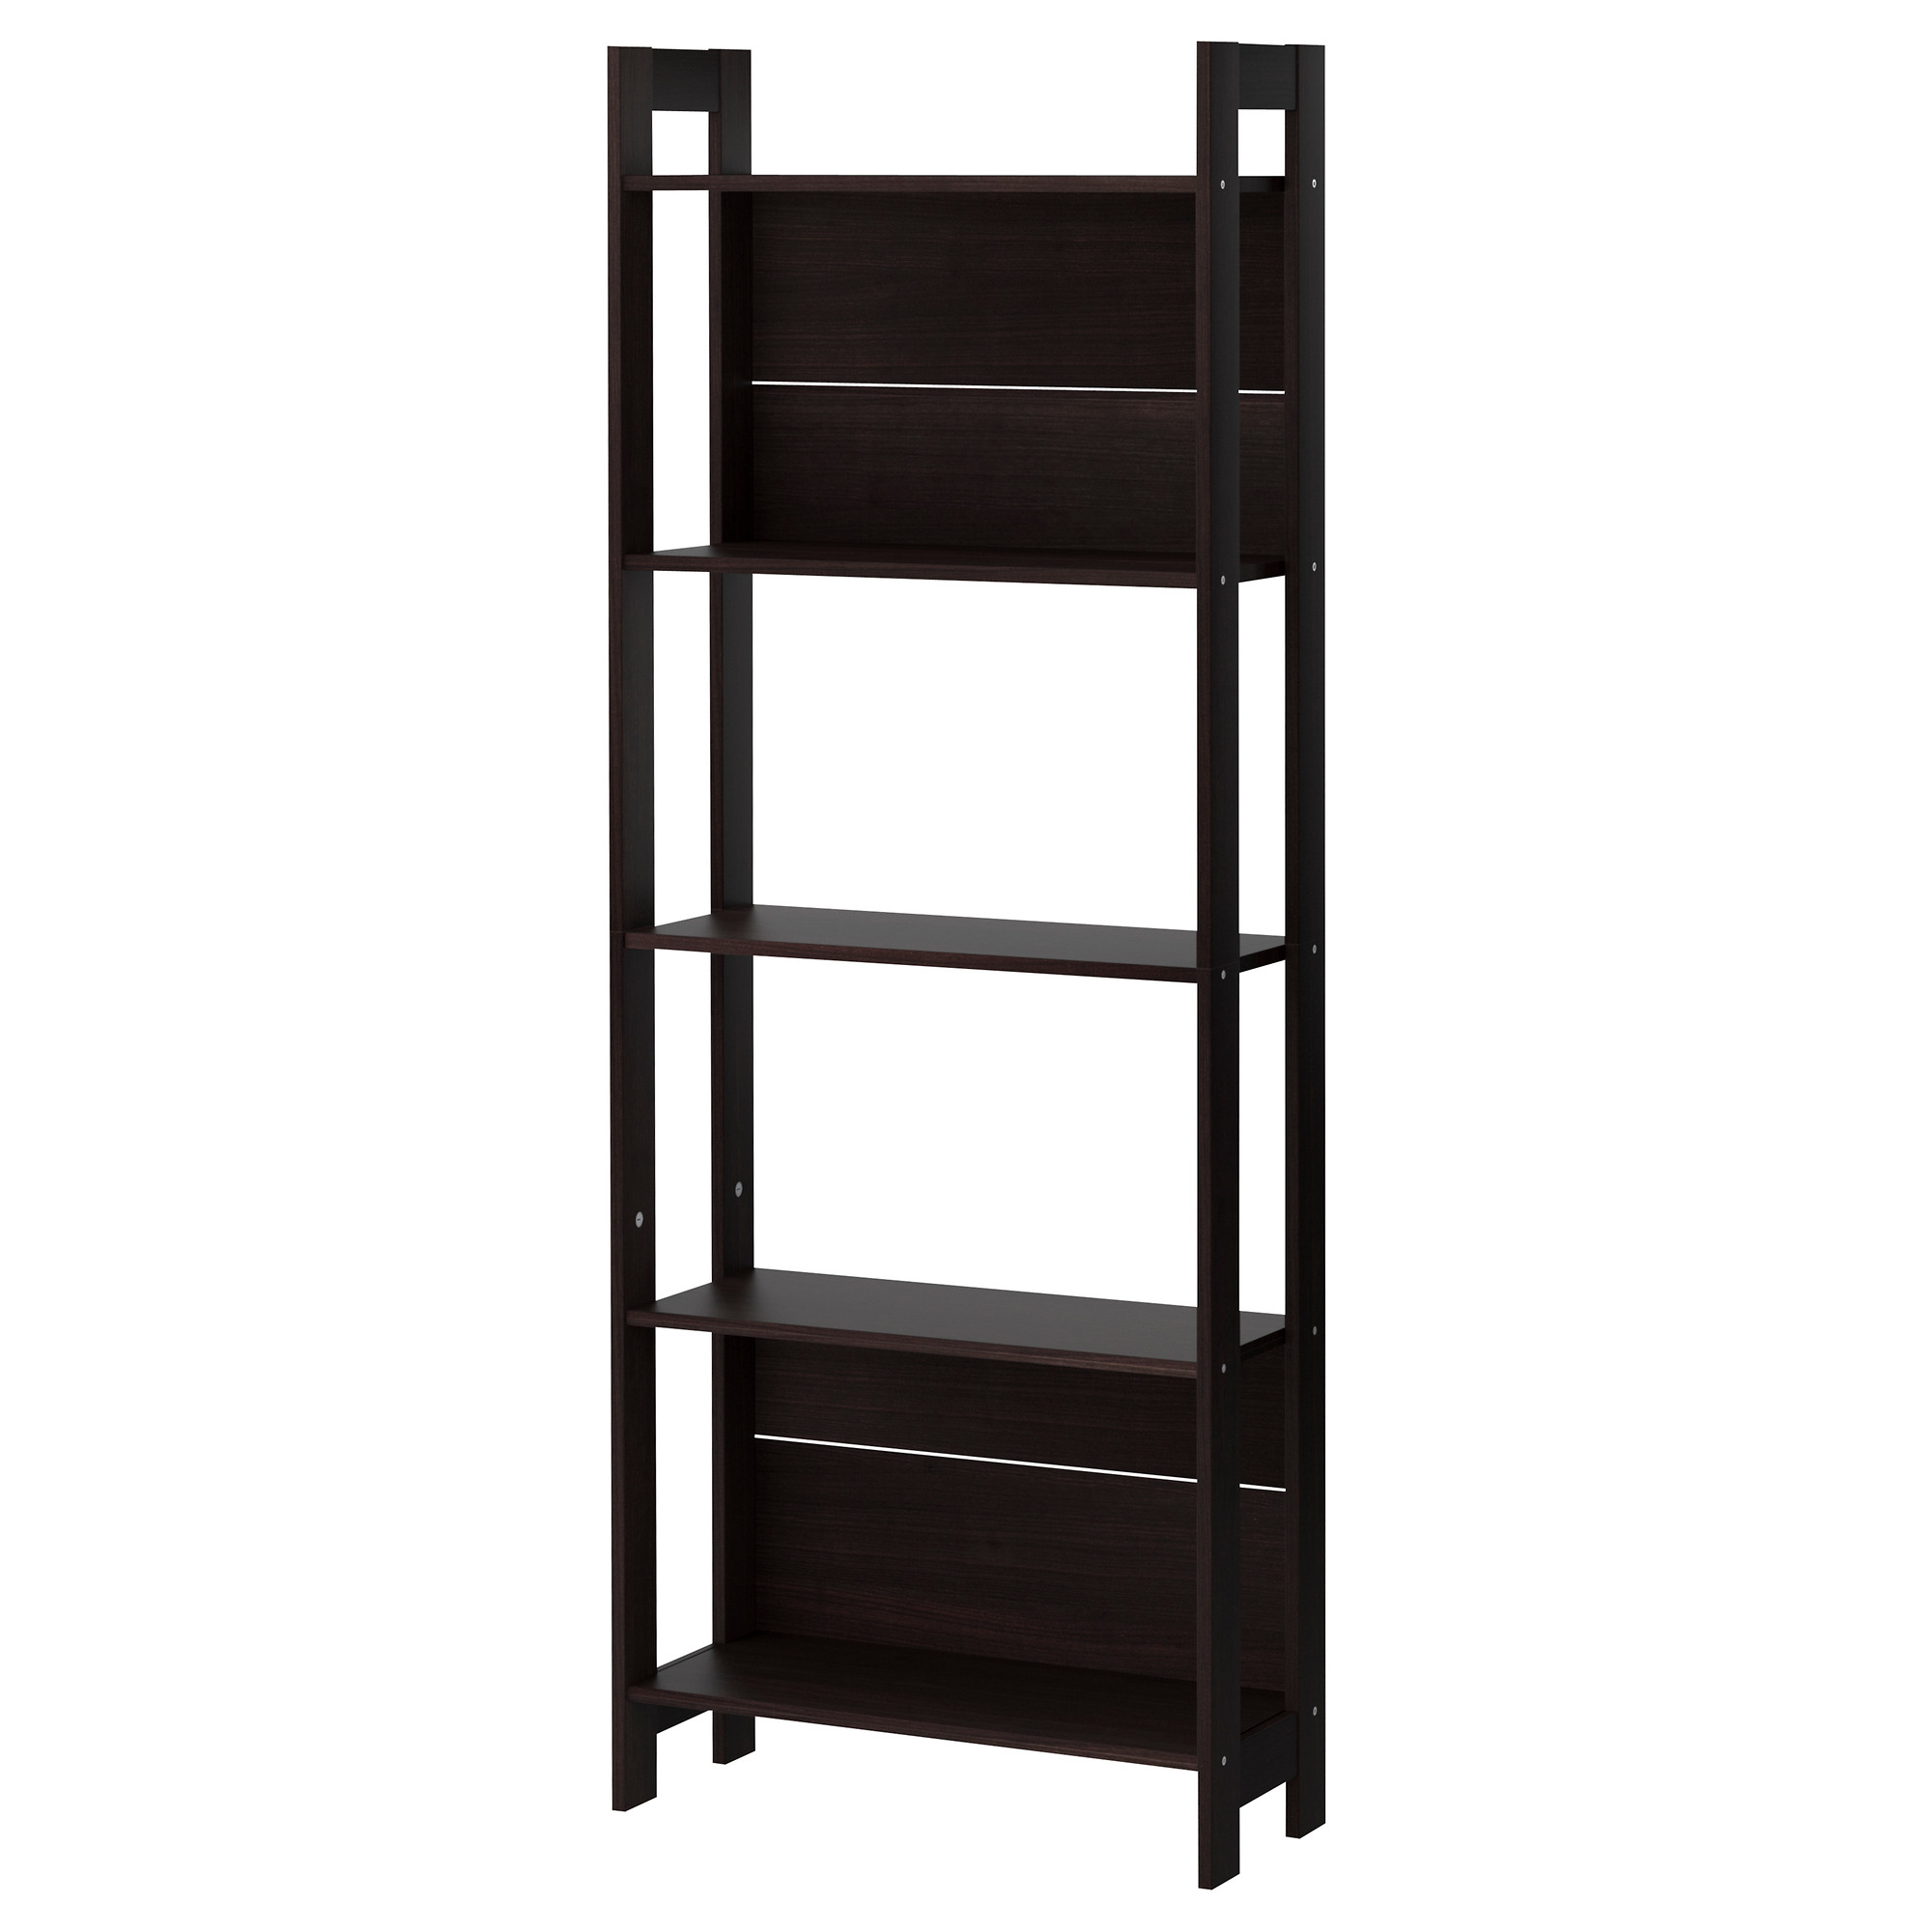 Bookcases - Modern & Traditional - IKEA